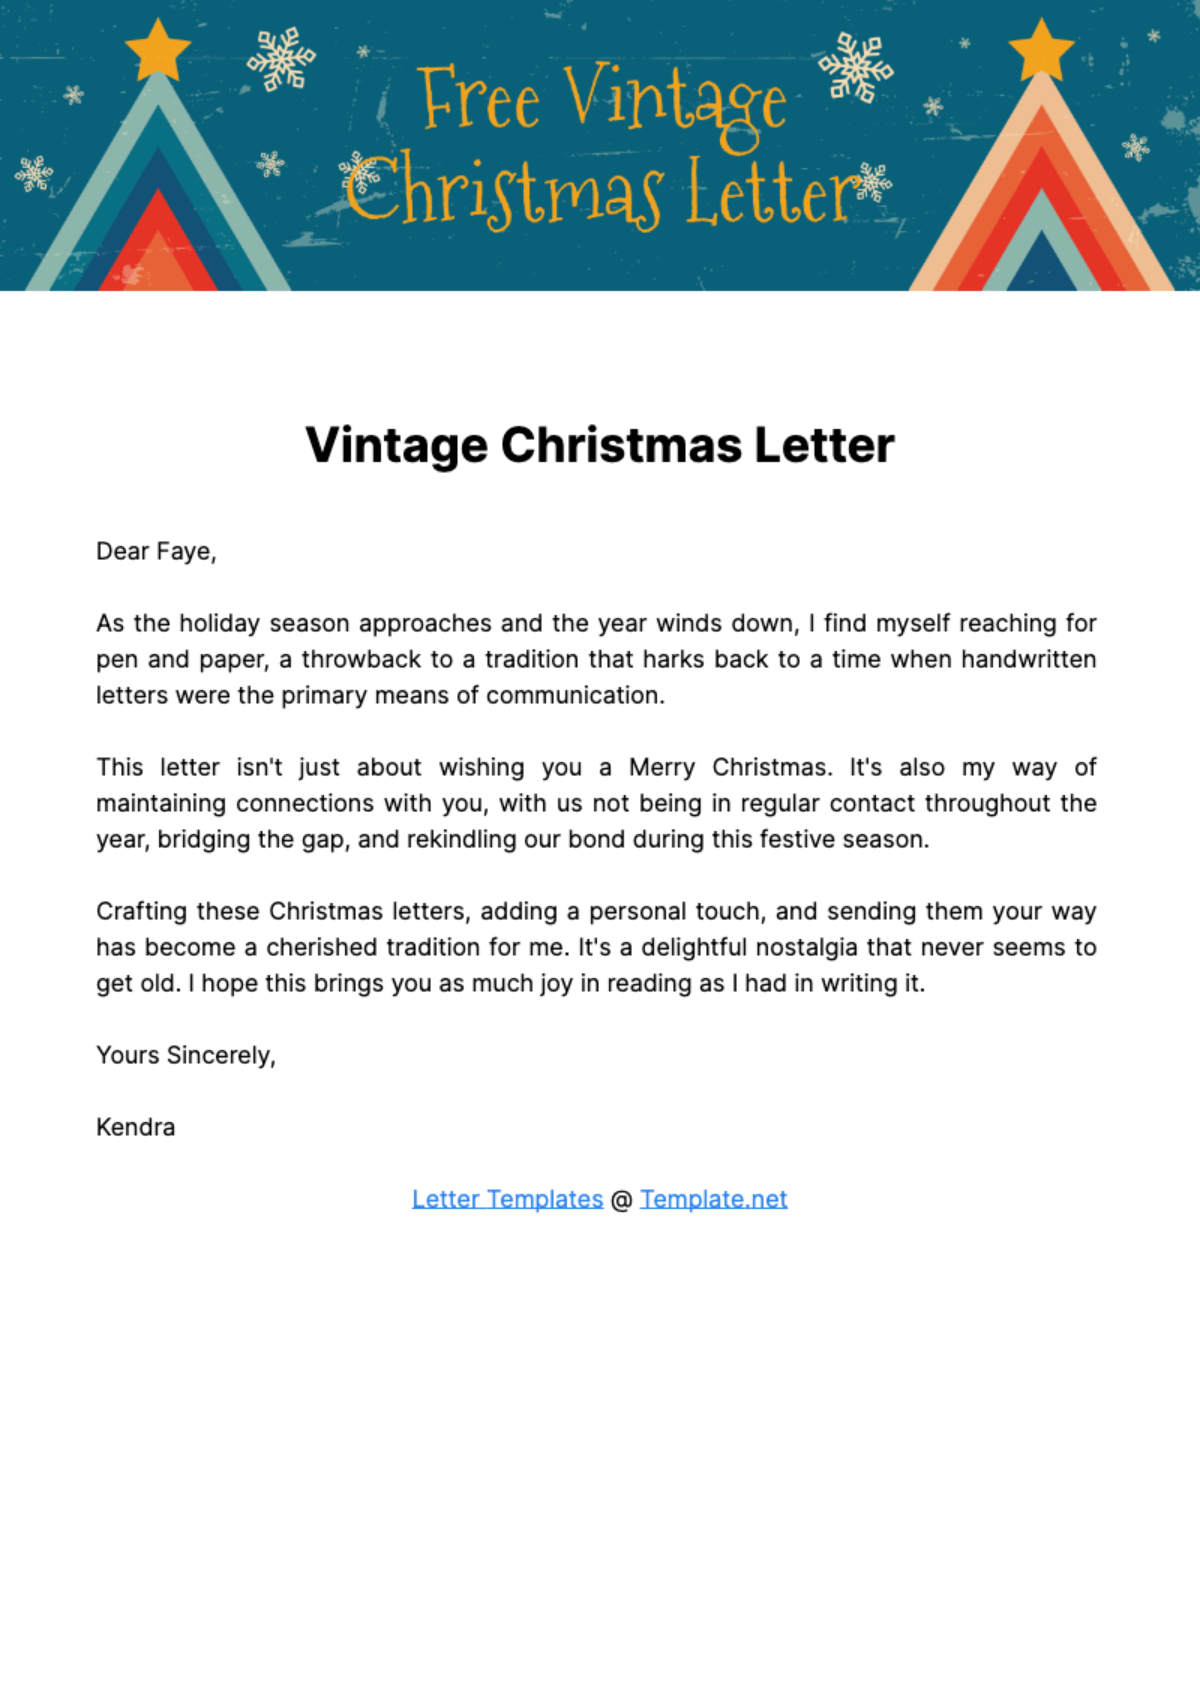 Free Vintage Christmas Letter Template